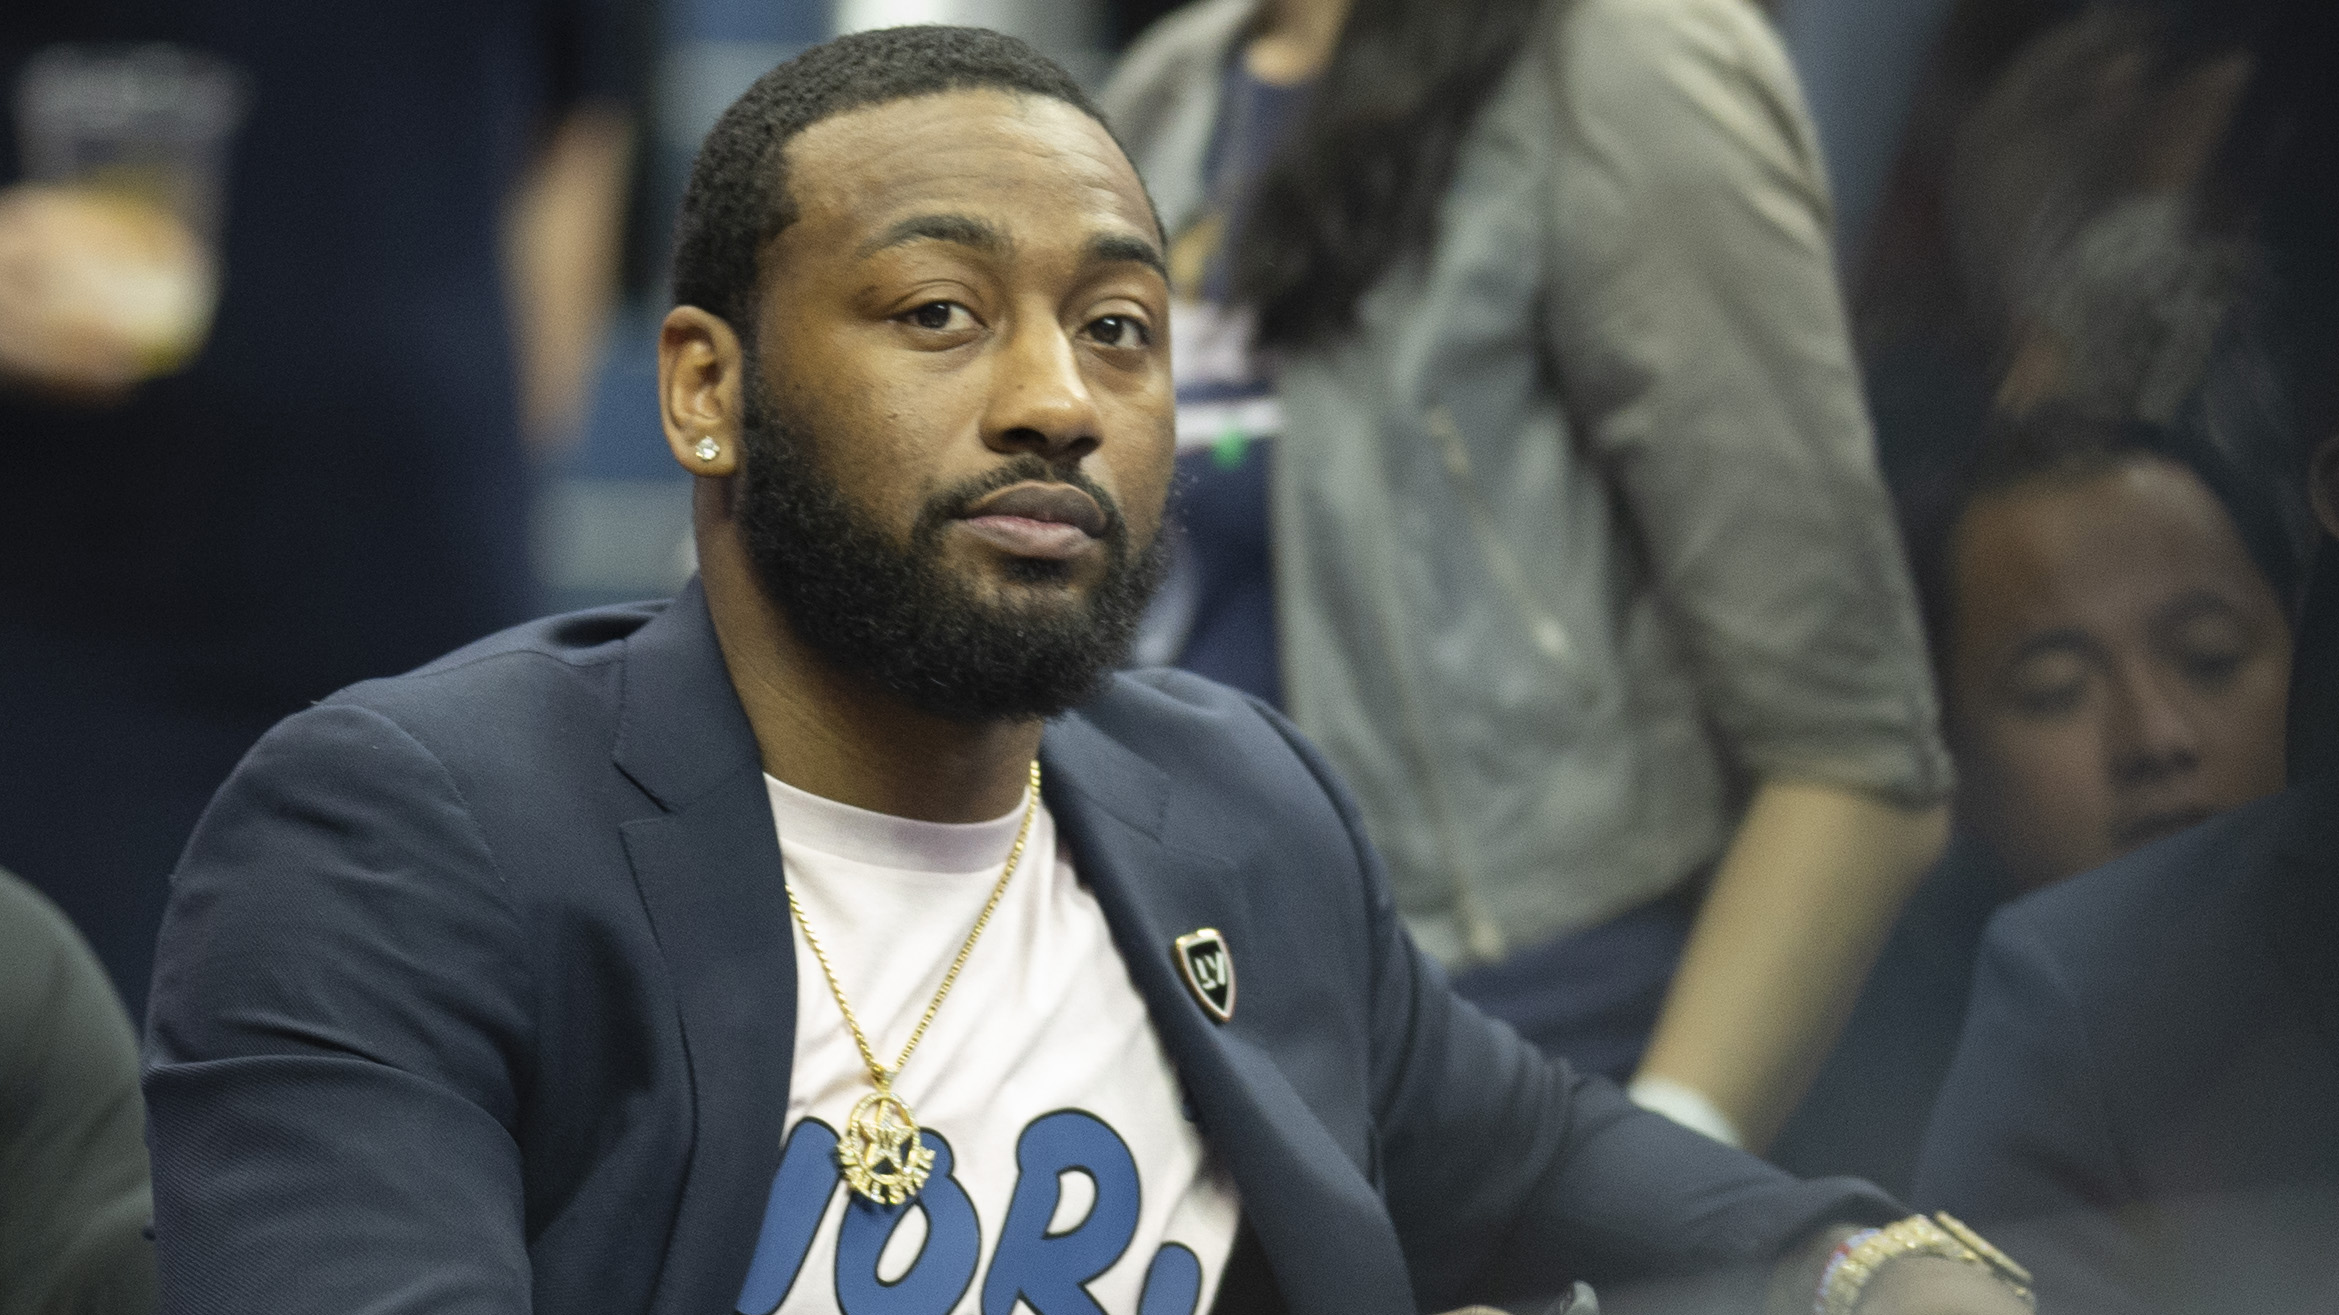 John Wall Reacts to Bucks' Boycott of Playoff Game in Protest of Police Brutality